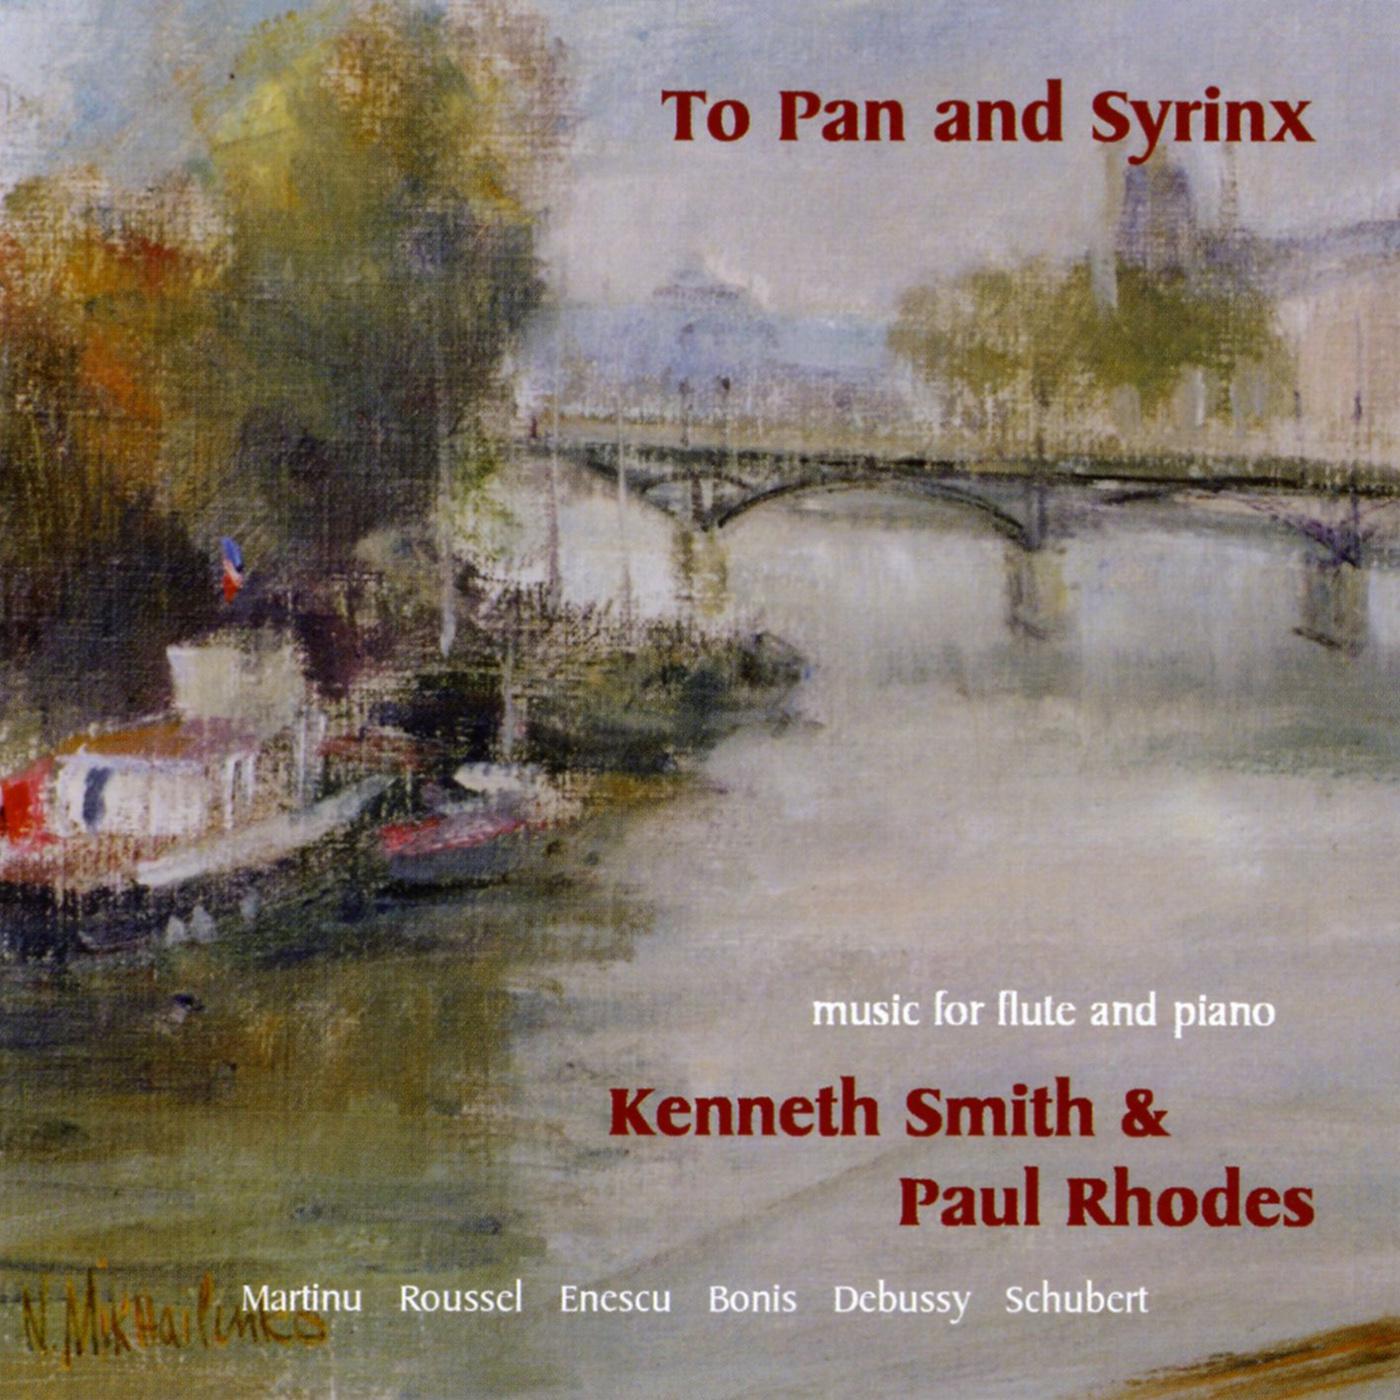 Flute and Piano Recital: Smith, Kenneth / Paul Rhodes - MARTINU, B. / ROUSSEL, A. / ENESCU, G. / BONIS, M. / DEBUSSY, C. (To Pan and Syrinx)